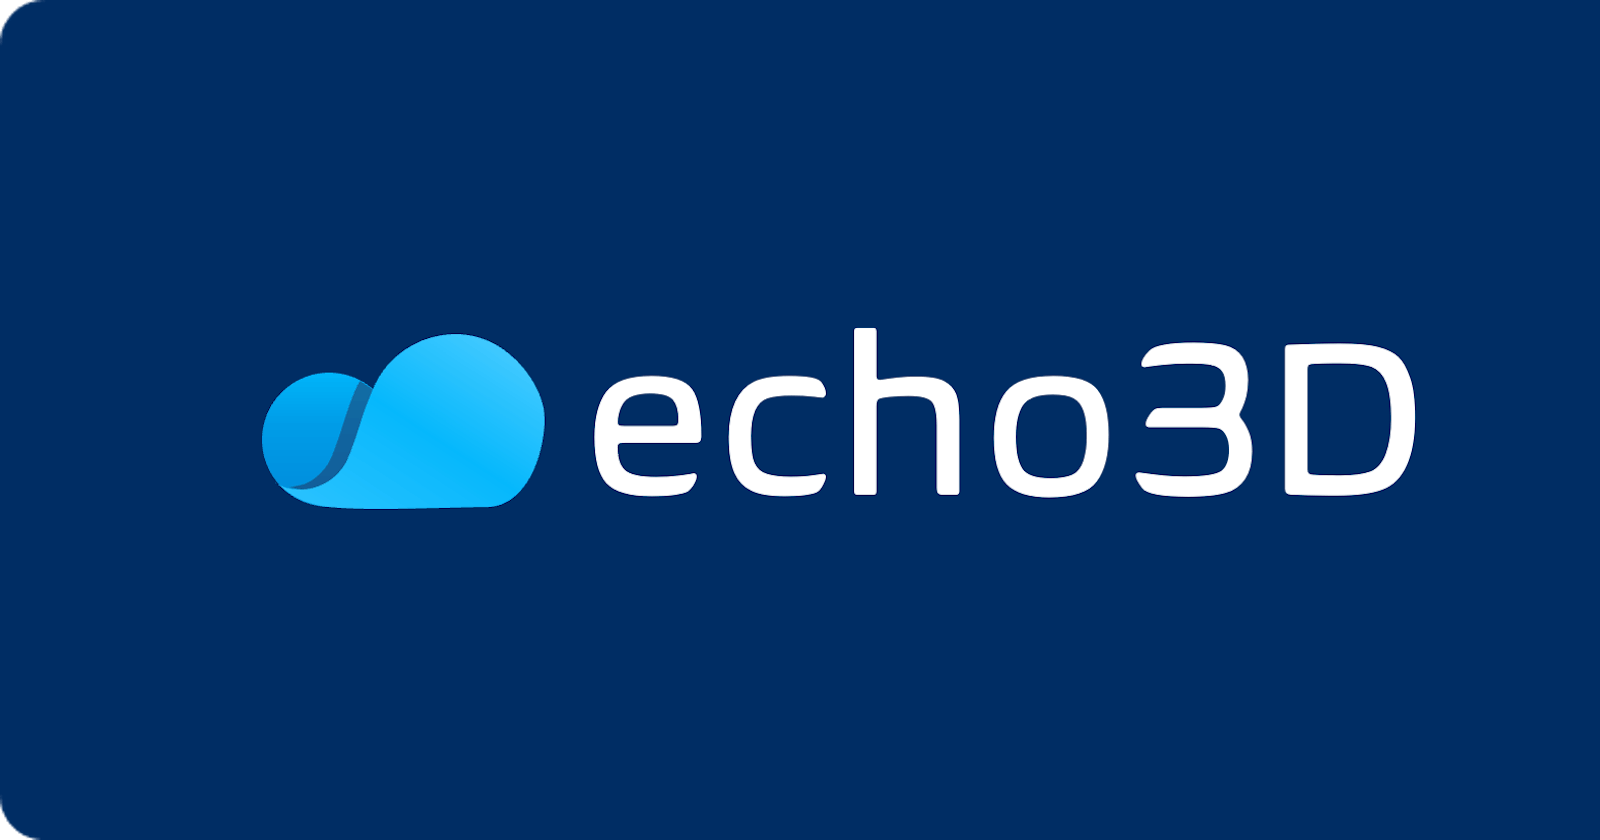 7 echo3D Features Every XR Pro Should Know